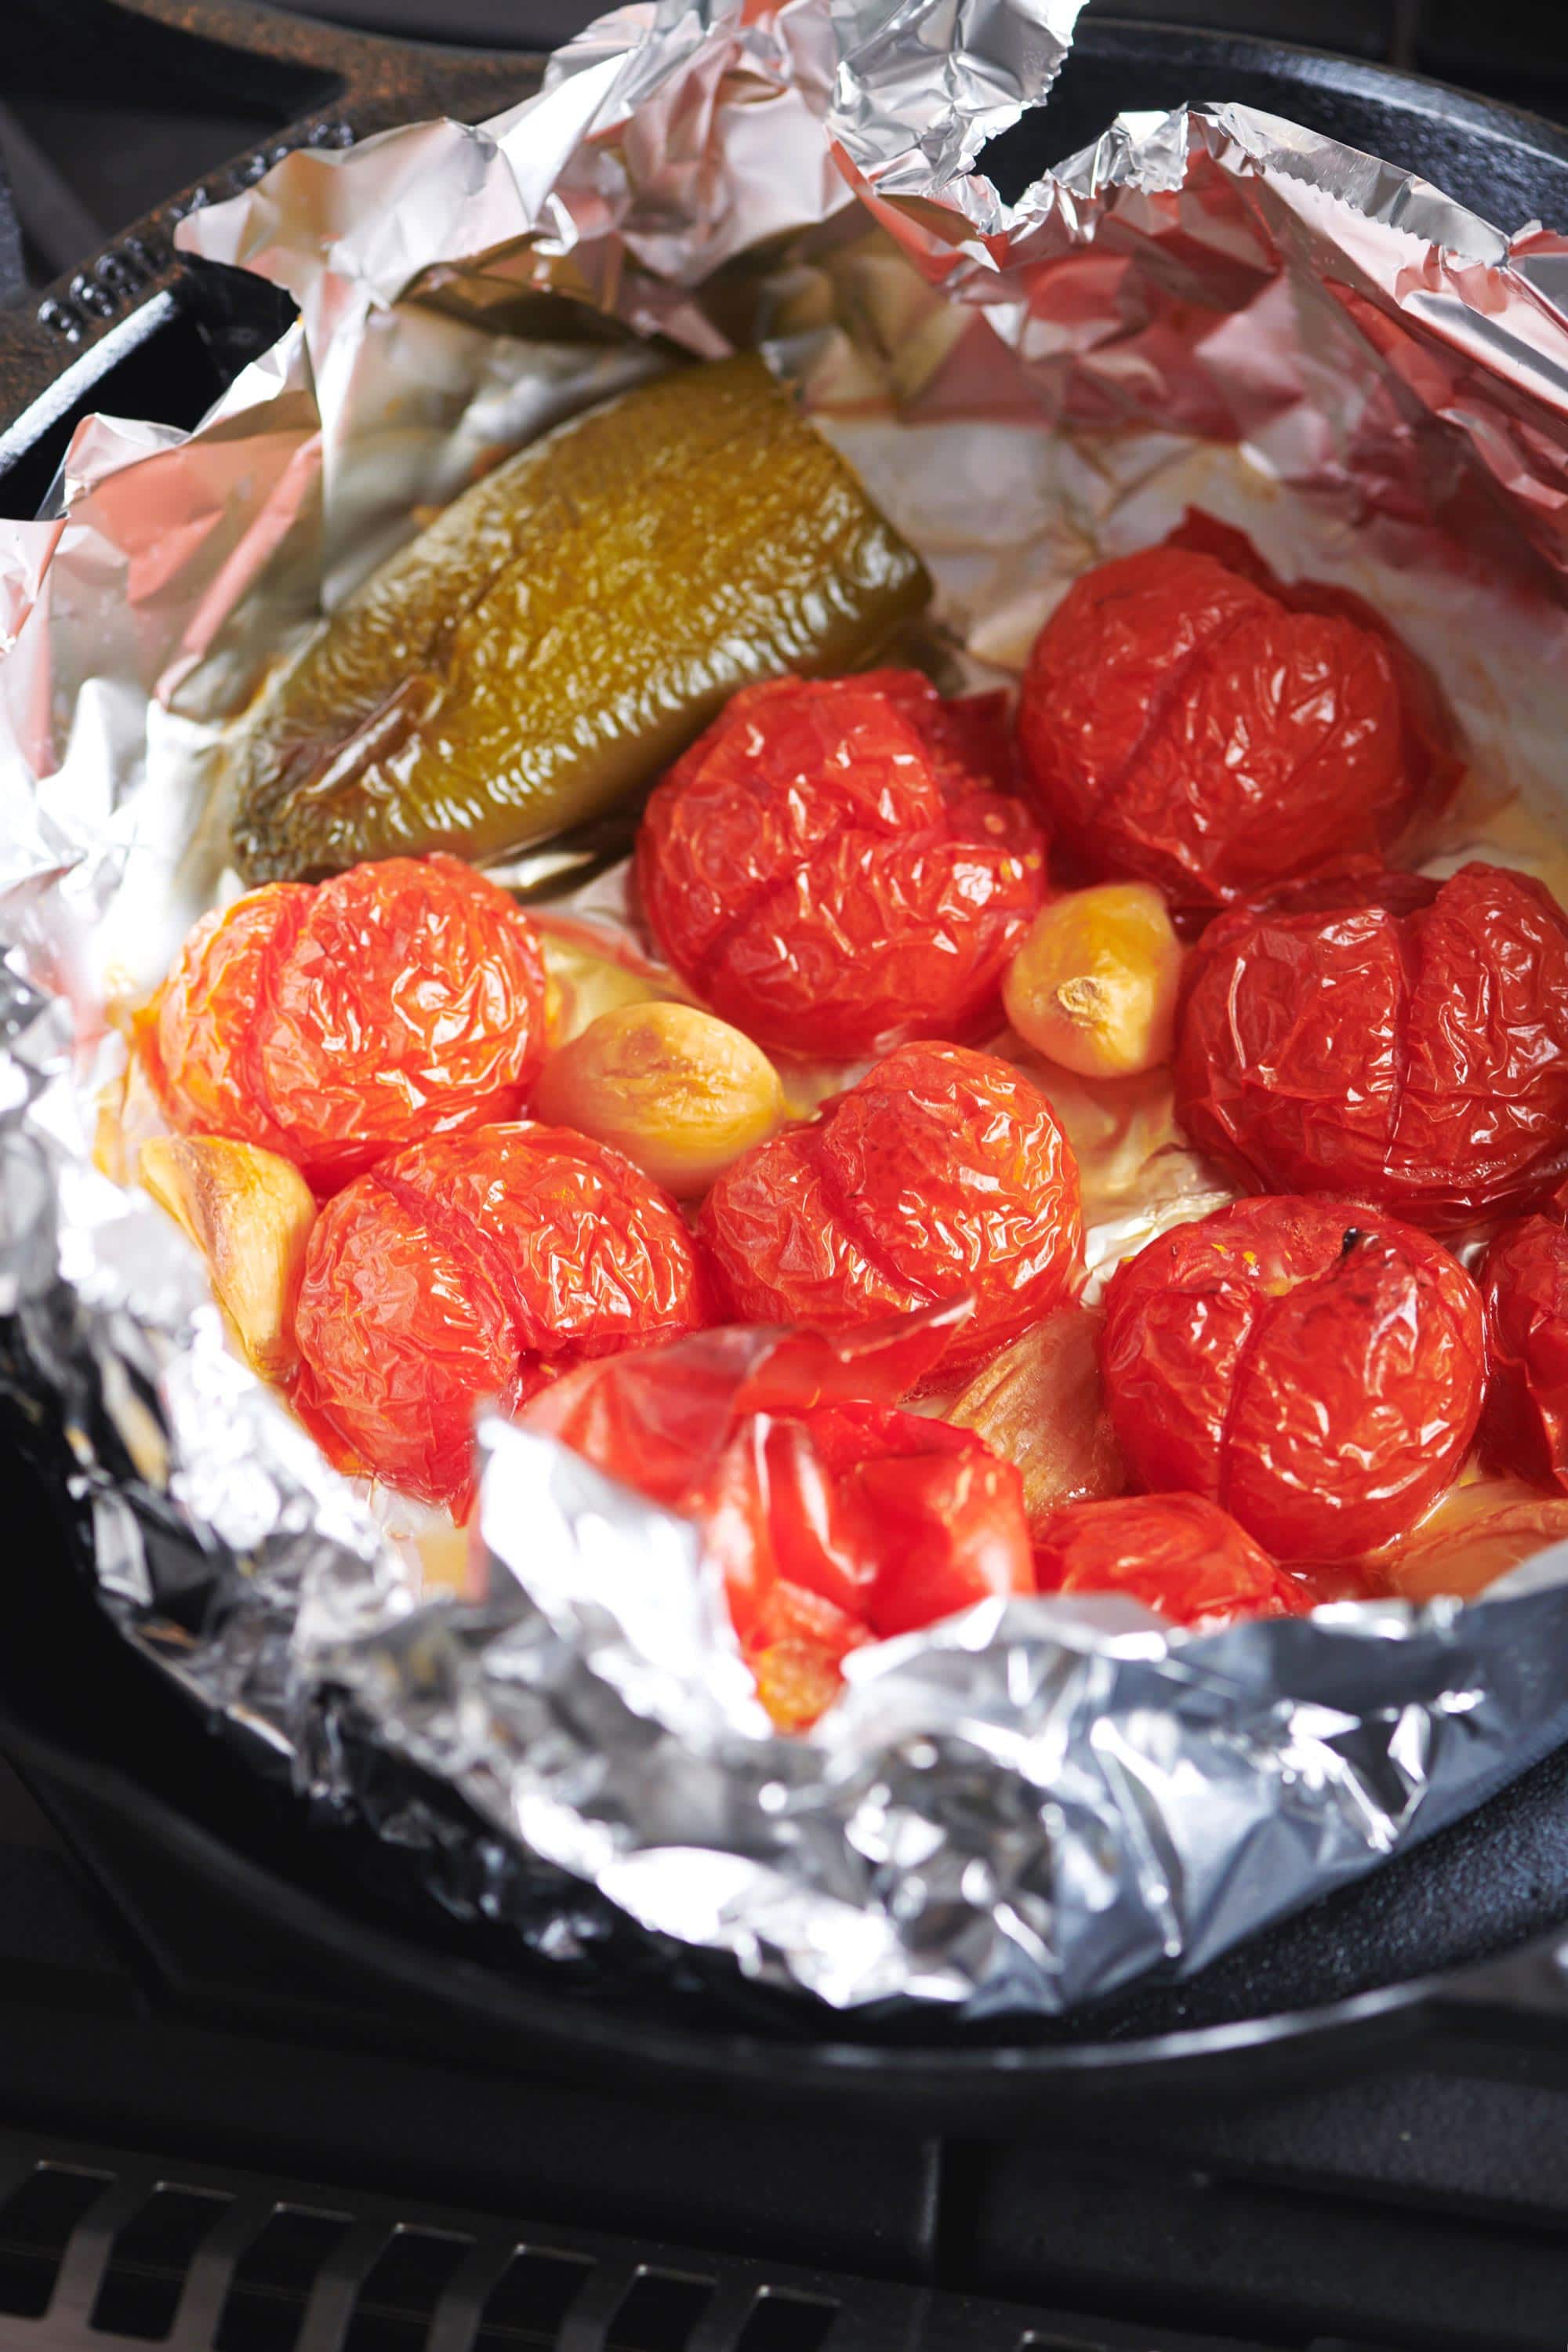 Hot pepper, tomatoes, and garlic in foil.